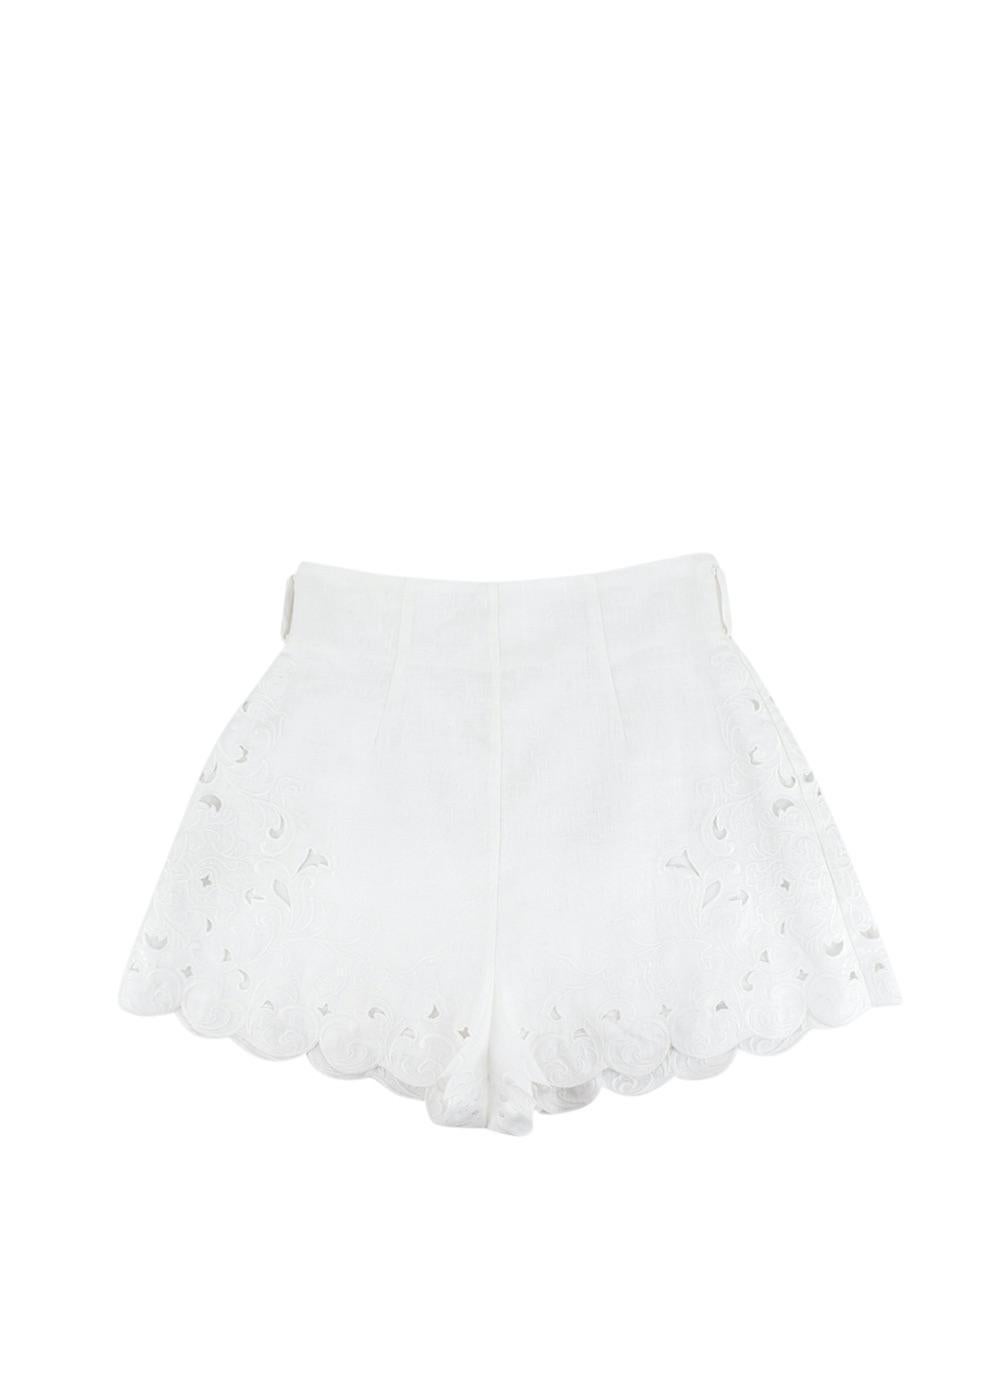 Zimmermann Ivory Embroidered Nina Shorts & Blouse - US 6 For Sale 2